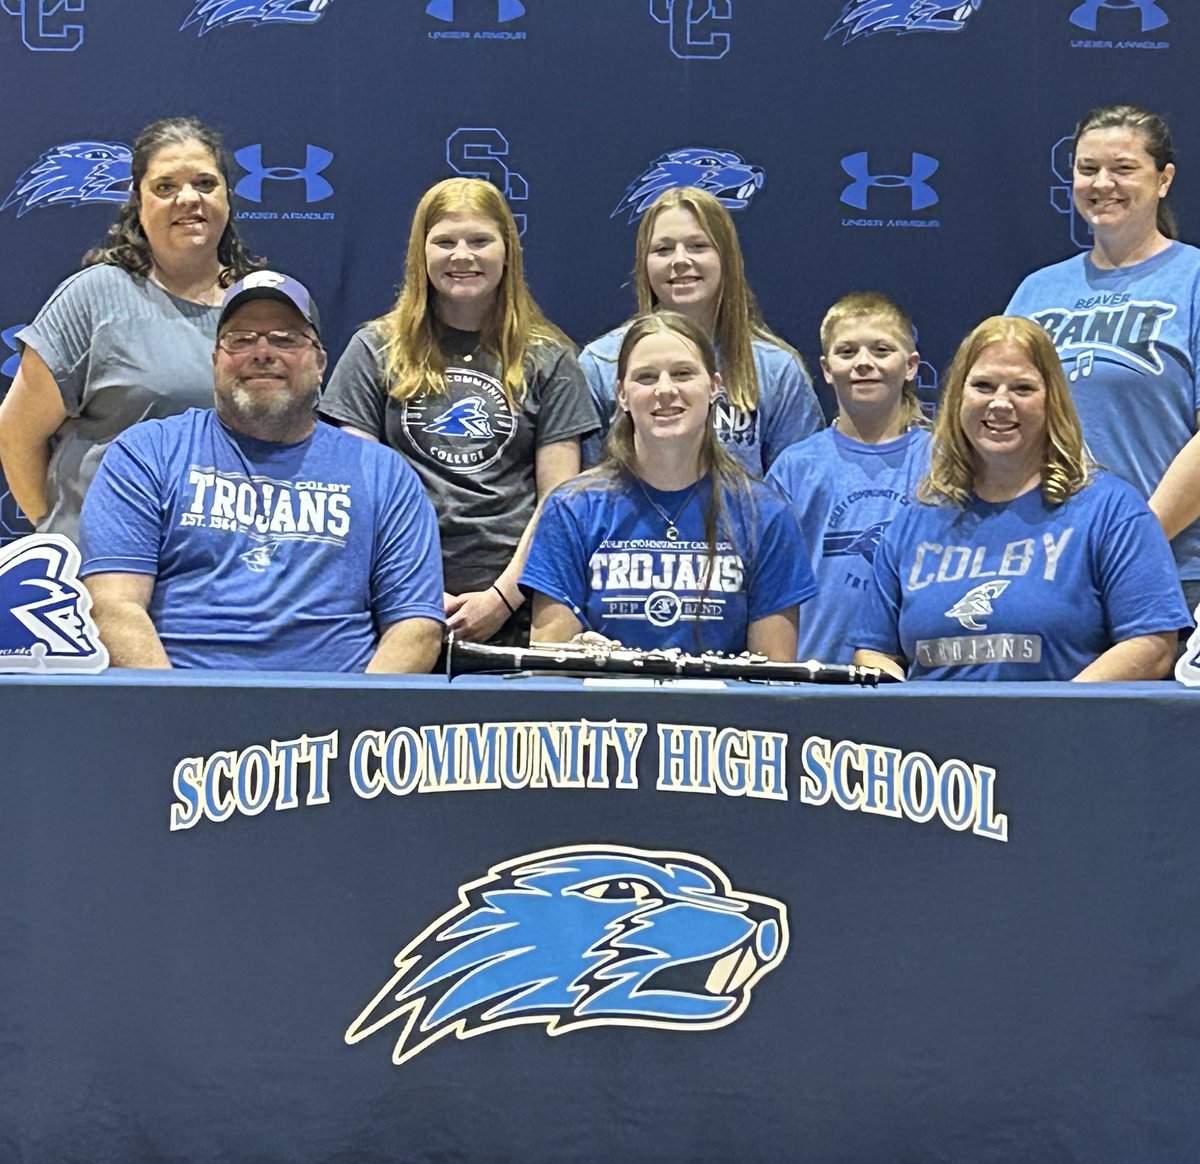 Congrats to Cally Cramer who signed to play in the Band at Colby Community College next year! #WeAreSC